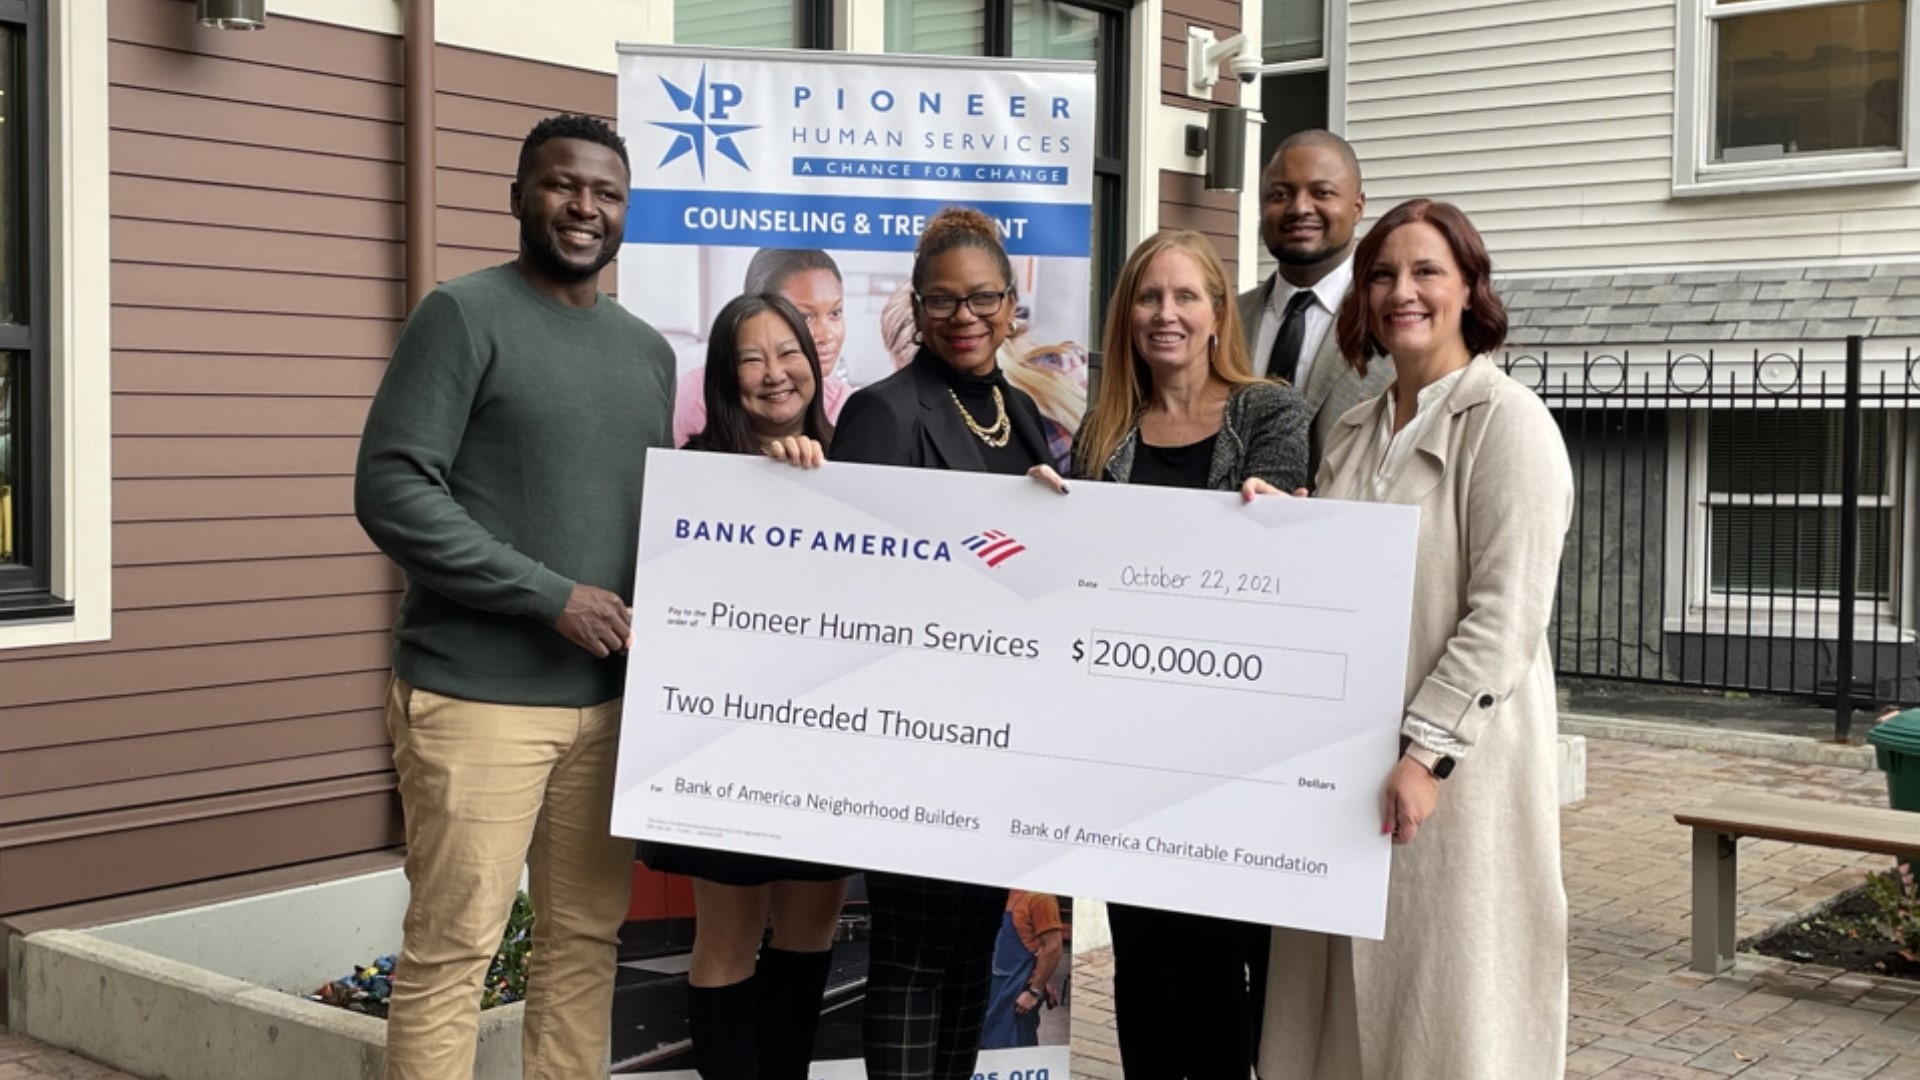 The Neighborhood Builders program has awarded $7 million to Puget Sound community groups since 2004. Sponsored by Bank of America.